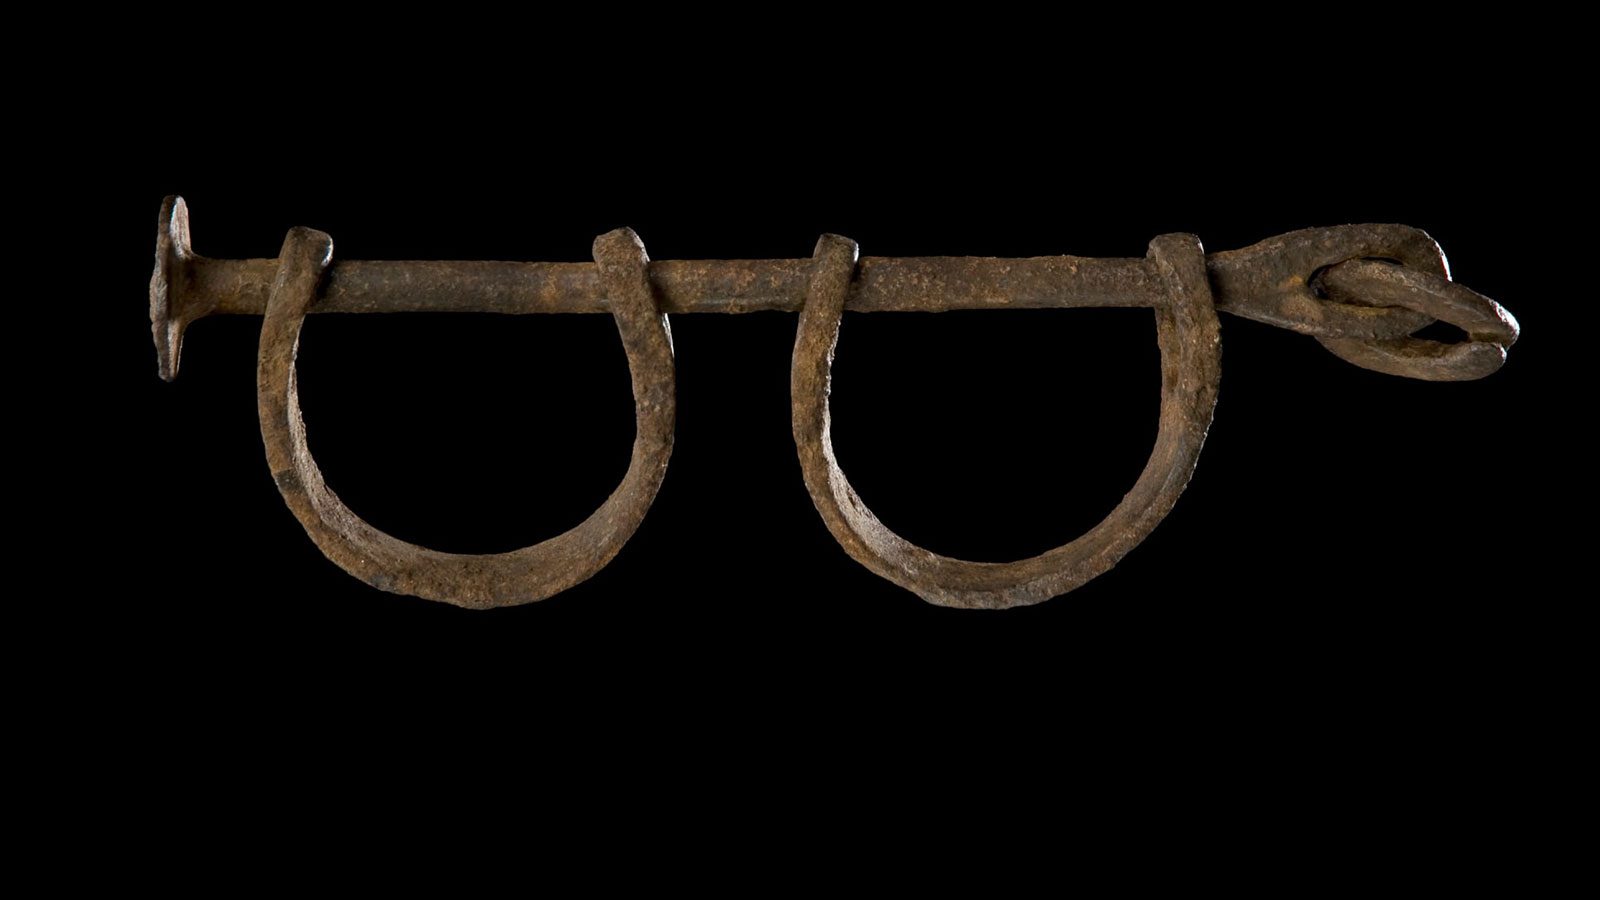 Iron shackles used on enslaved people prior to 1860.